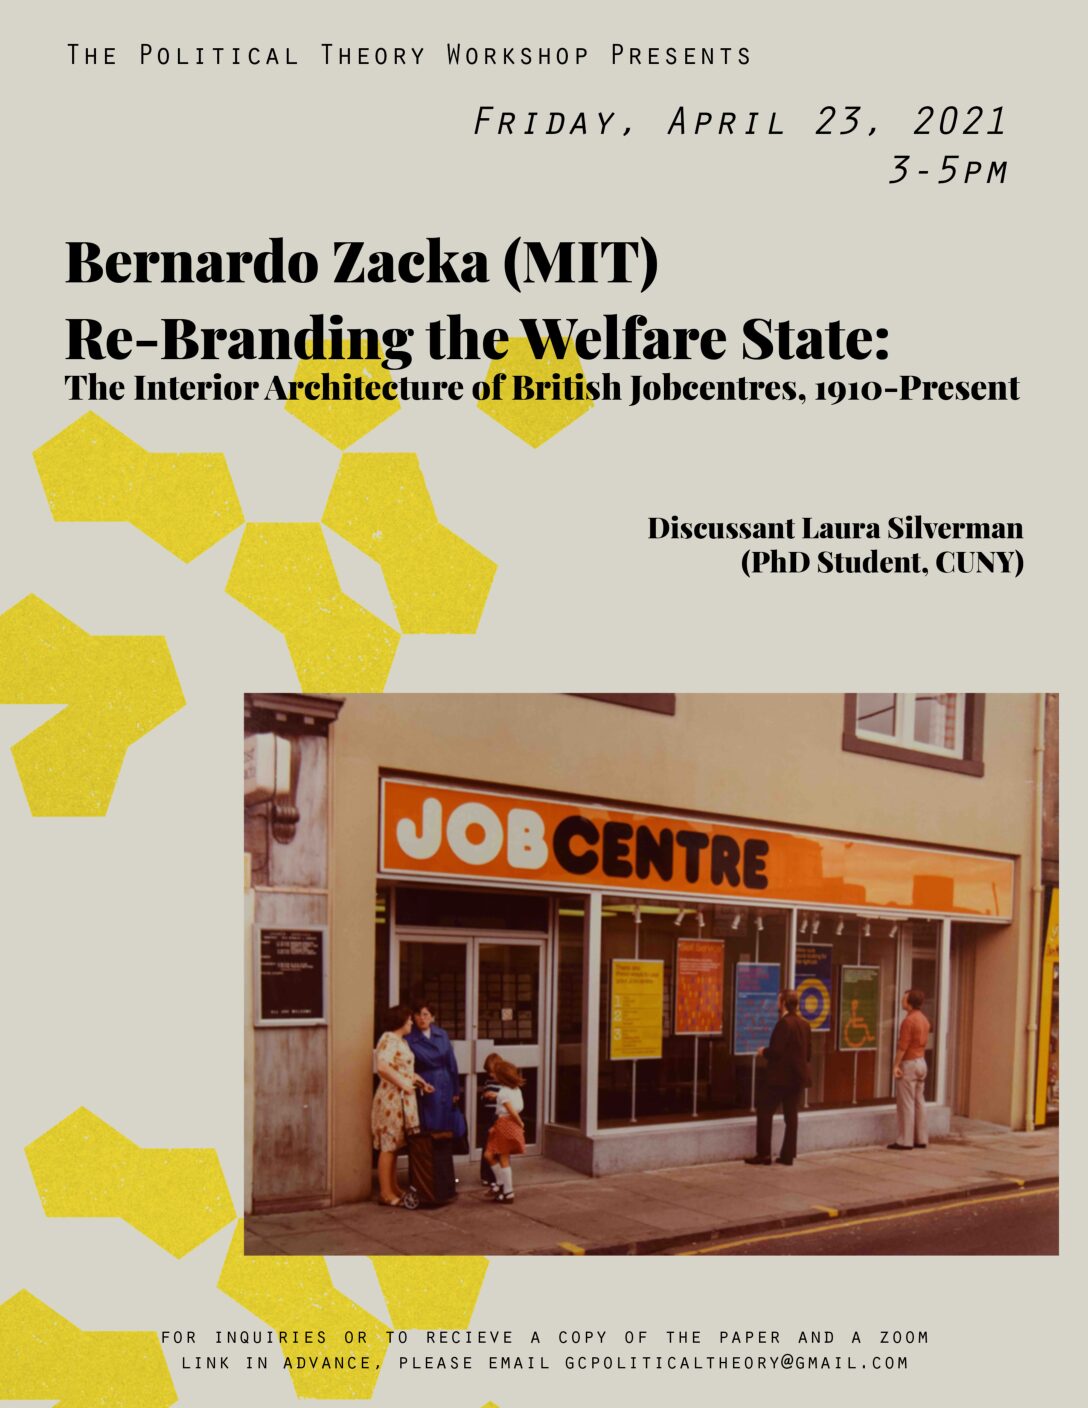 Political Theory Workshop, Bernardo Zacka, "Re-Branding the Welfare State: The Interior Architecture of British Jobcentres, 1910-Present," Friday, April 23, 3:00-5:00pm